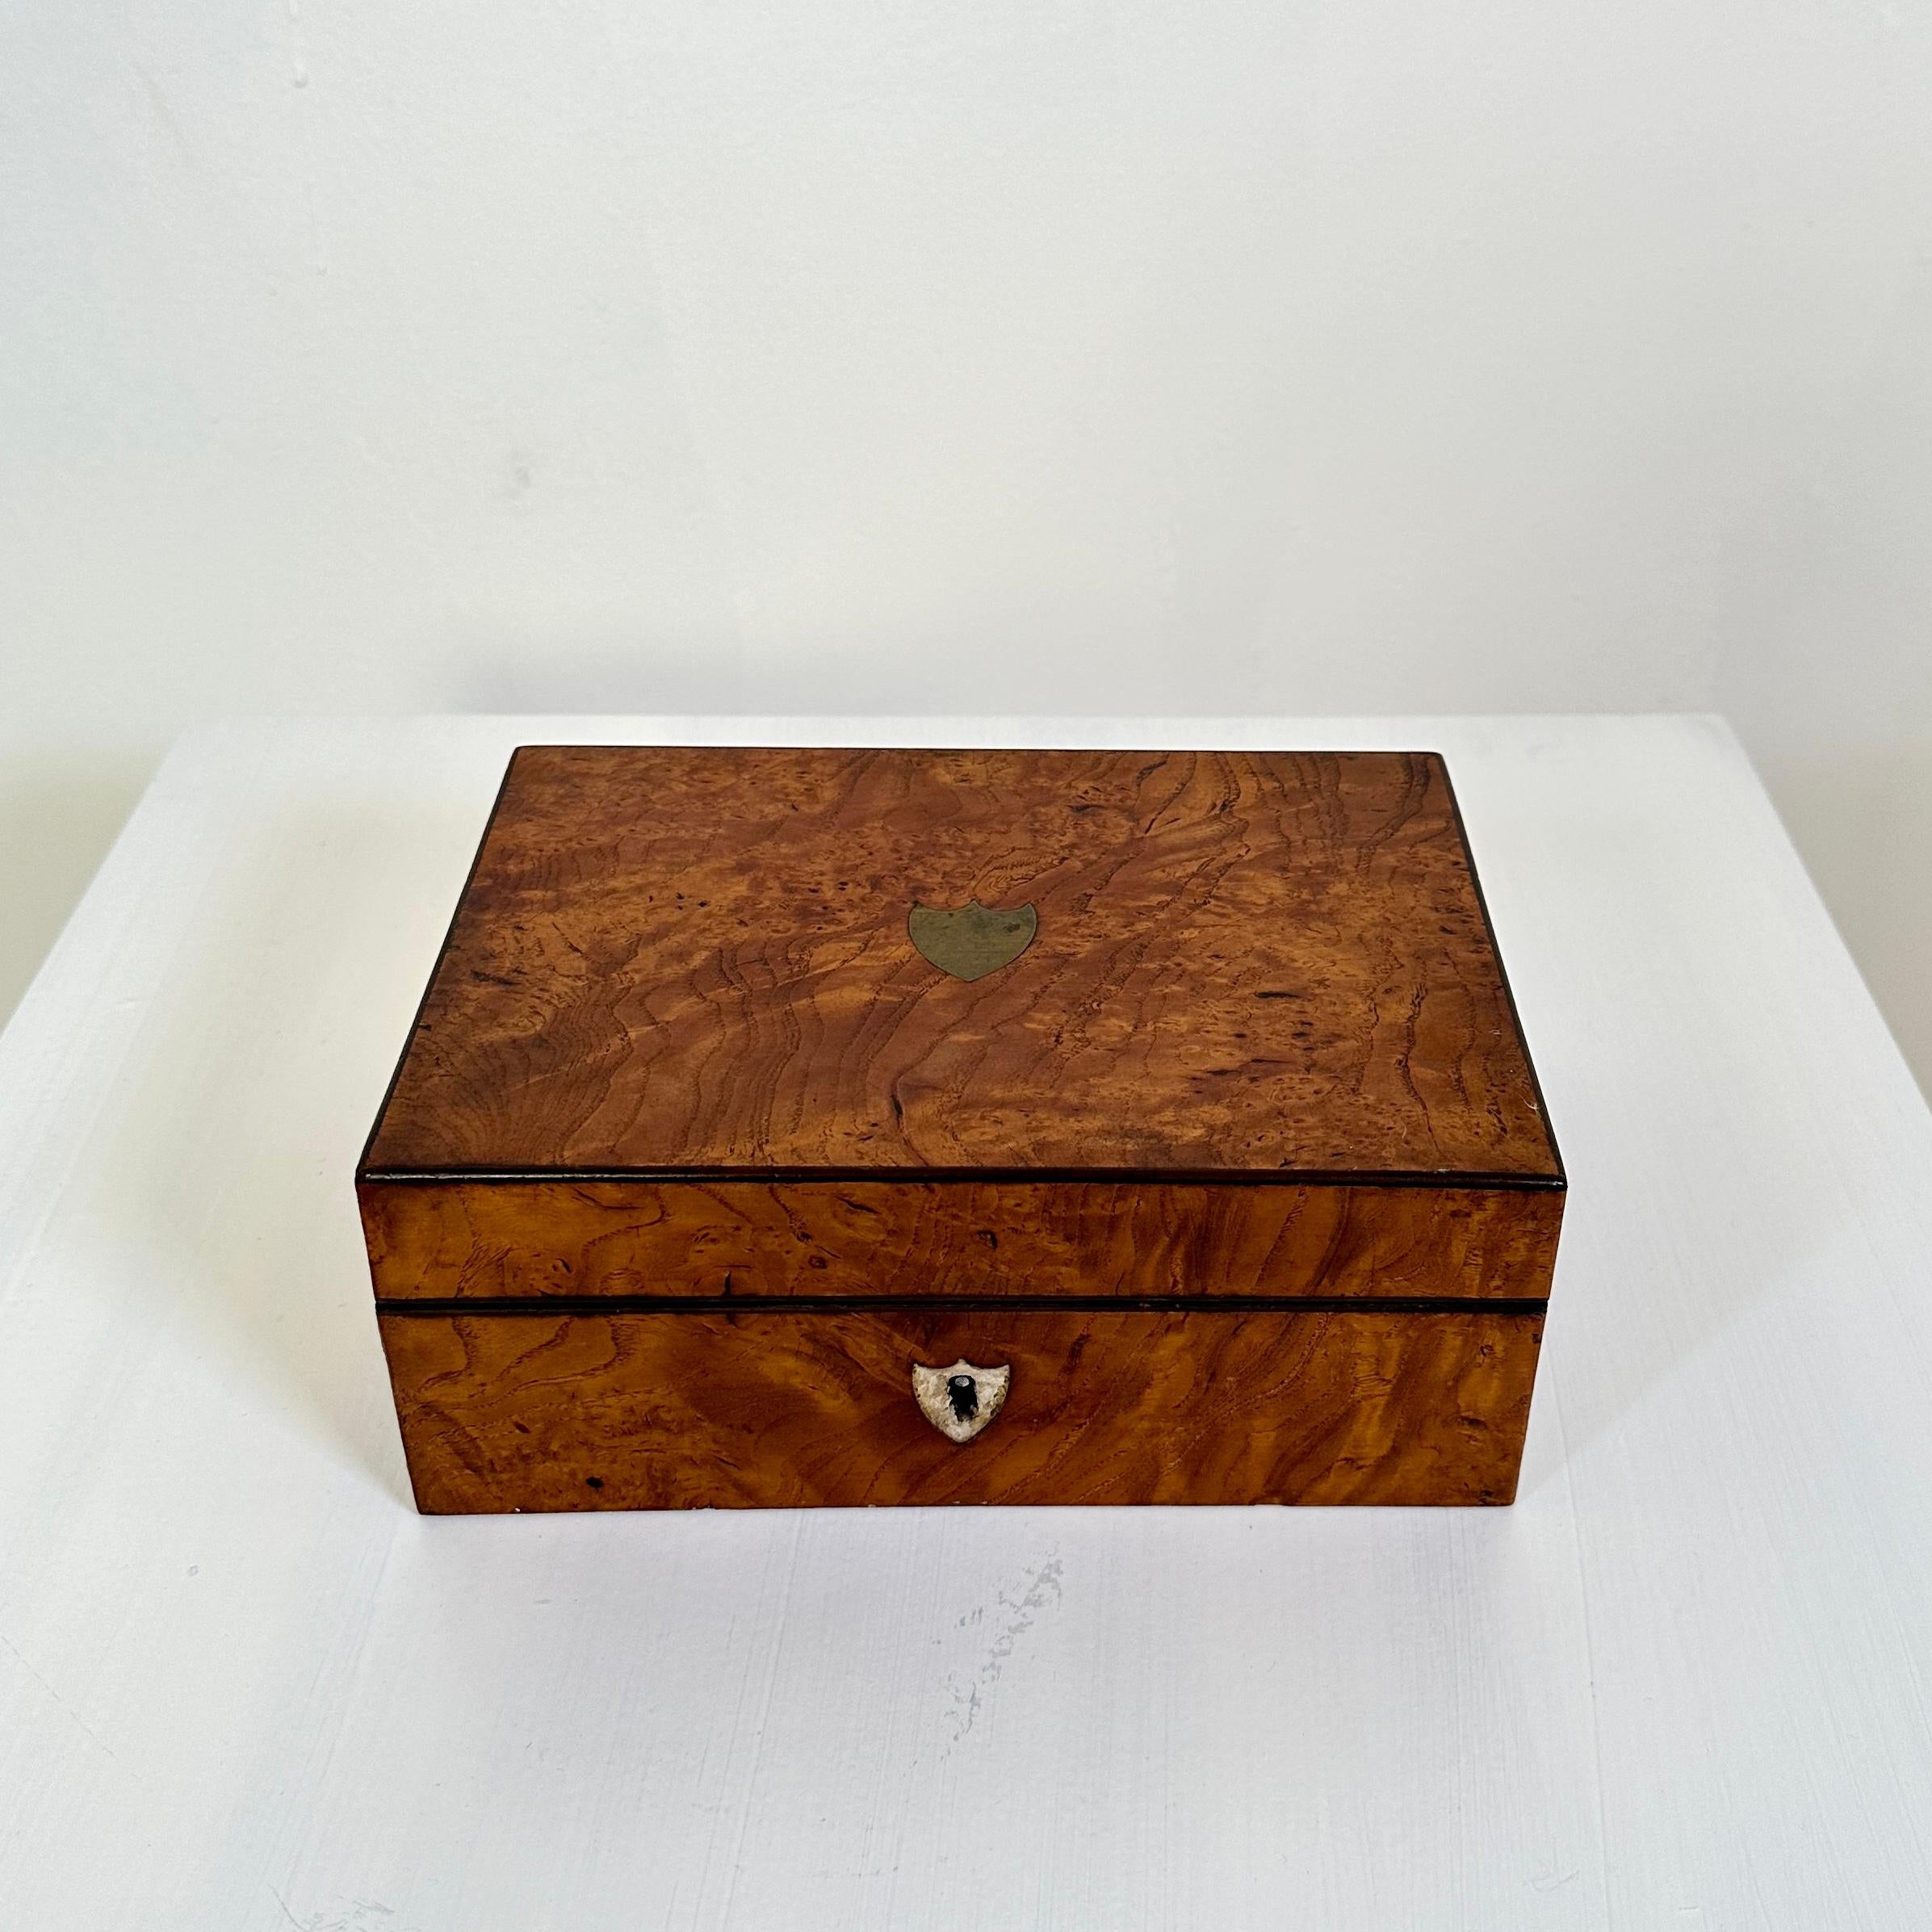 This beautiful 19th Century Biedermeier Jewelry Box was made in burl walnut around 1820.
It is made out of pine and veneered in burl walnut and the inside is covered in blue velvet.
Great vintage antique condition.
A unique piece which is a great